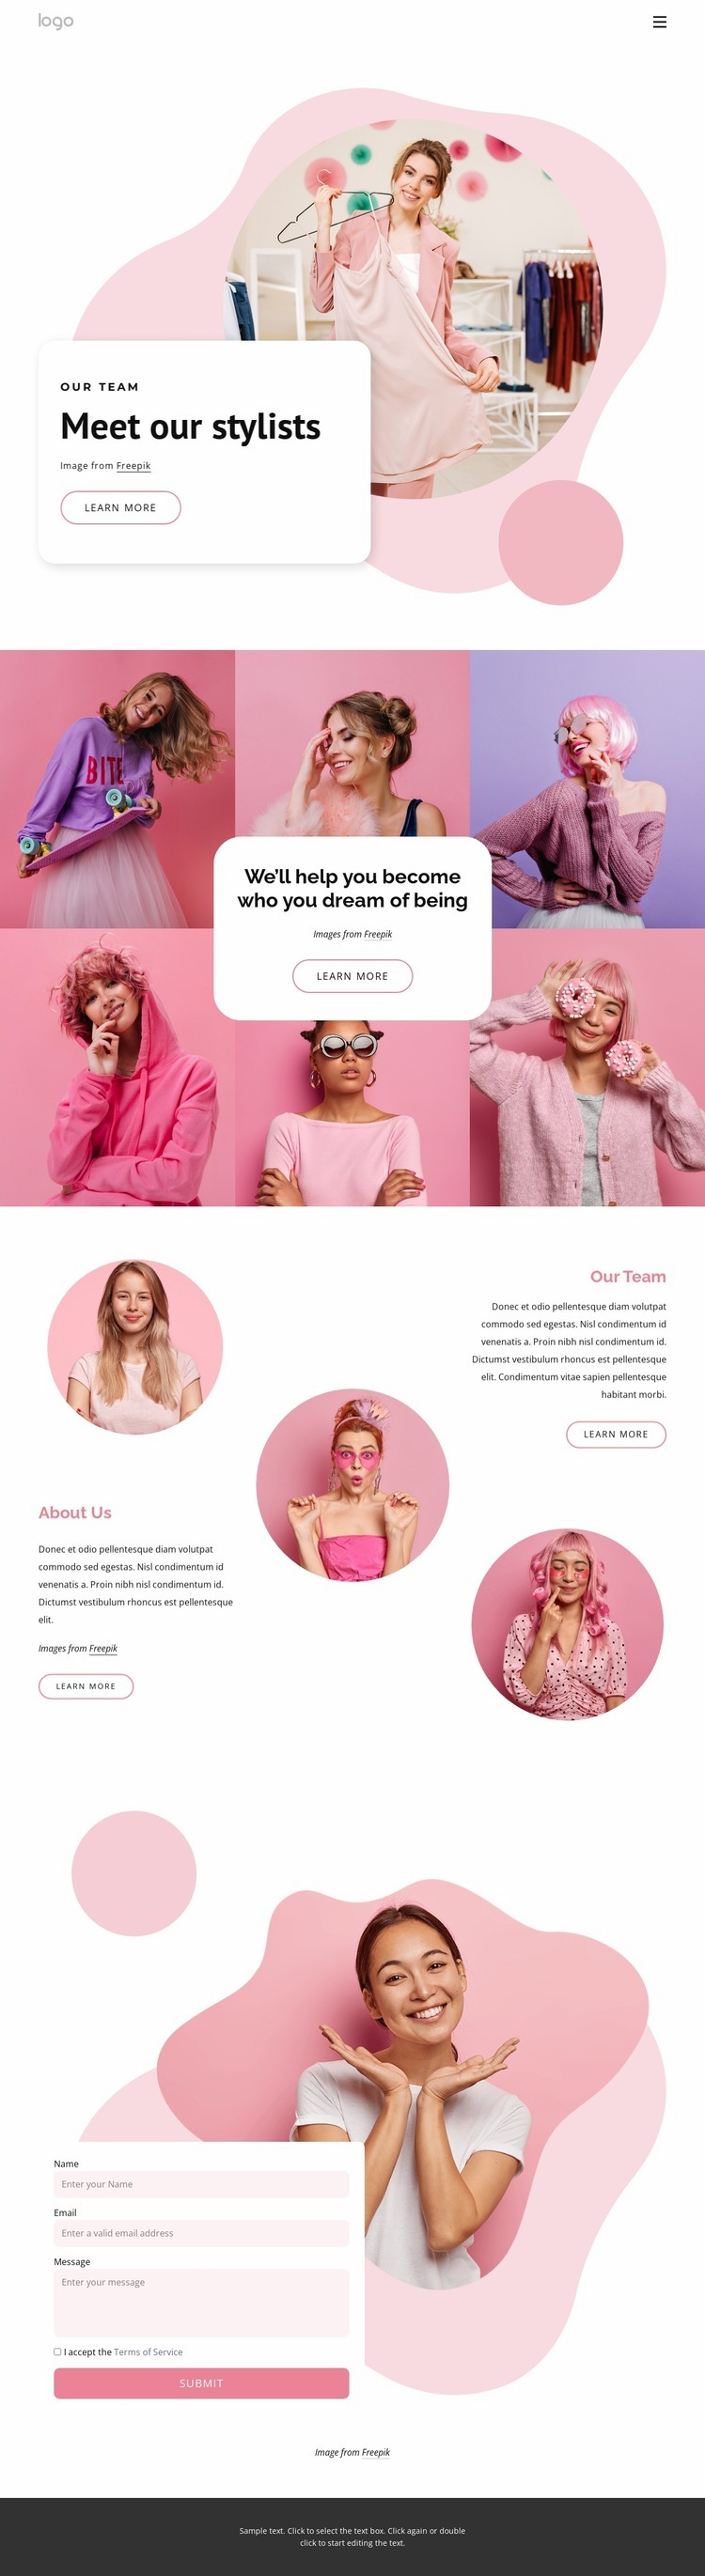 Meet our stylists Homepage Design